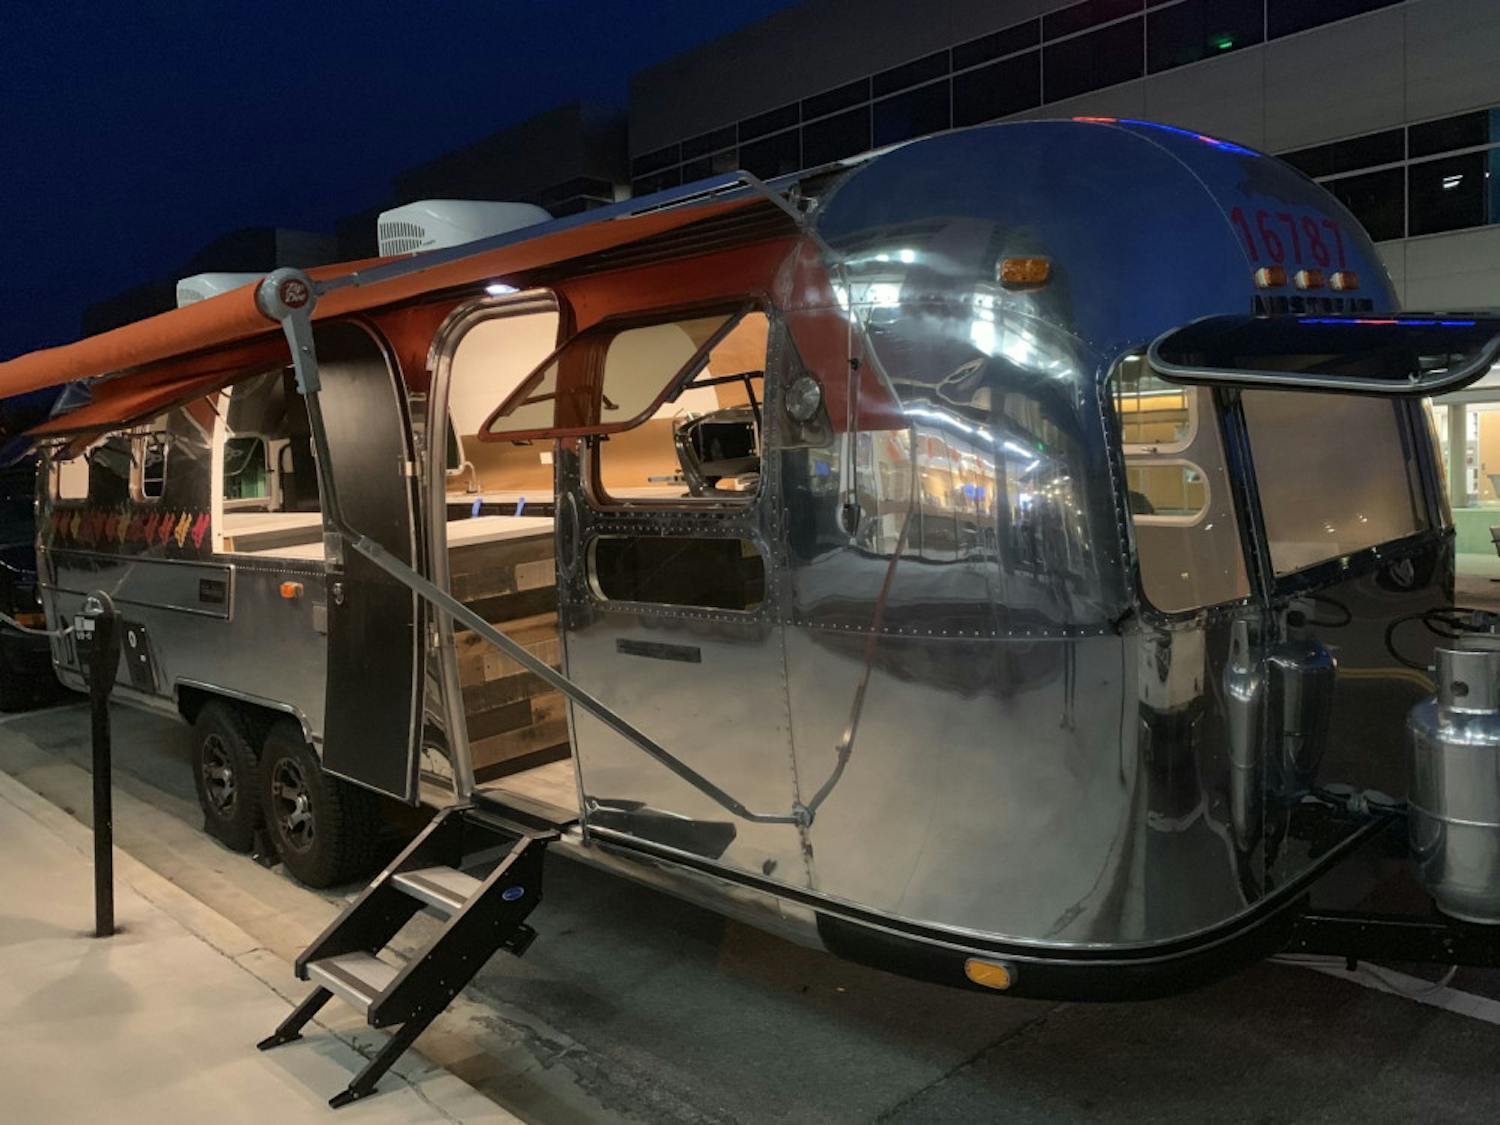 The Opus Coffee Airstream is displayed outside Gainesville’s Innovation District Thursday night. It will be moved to 4th Ave Food Park and open for business this month.